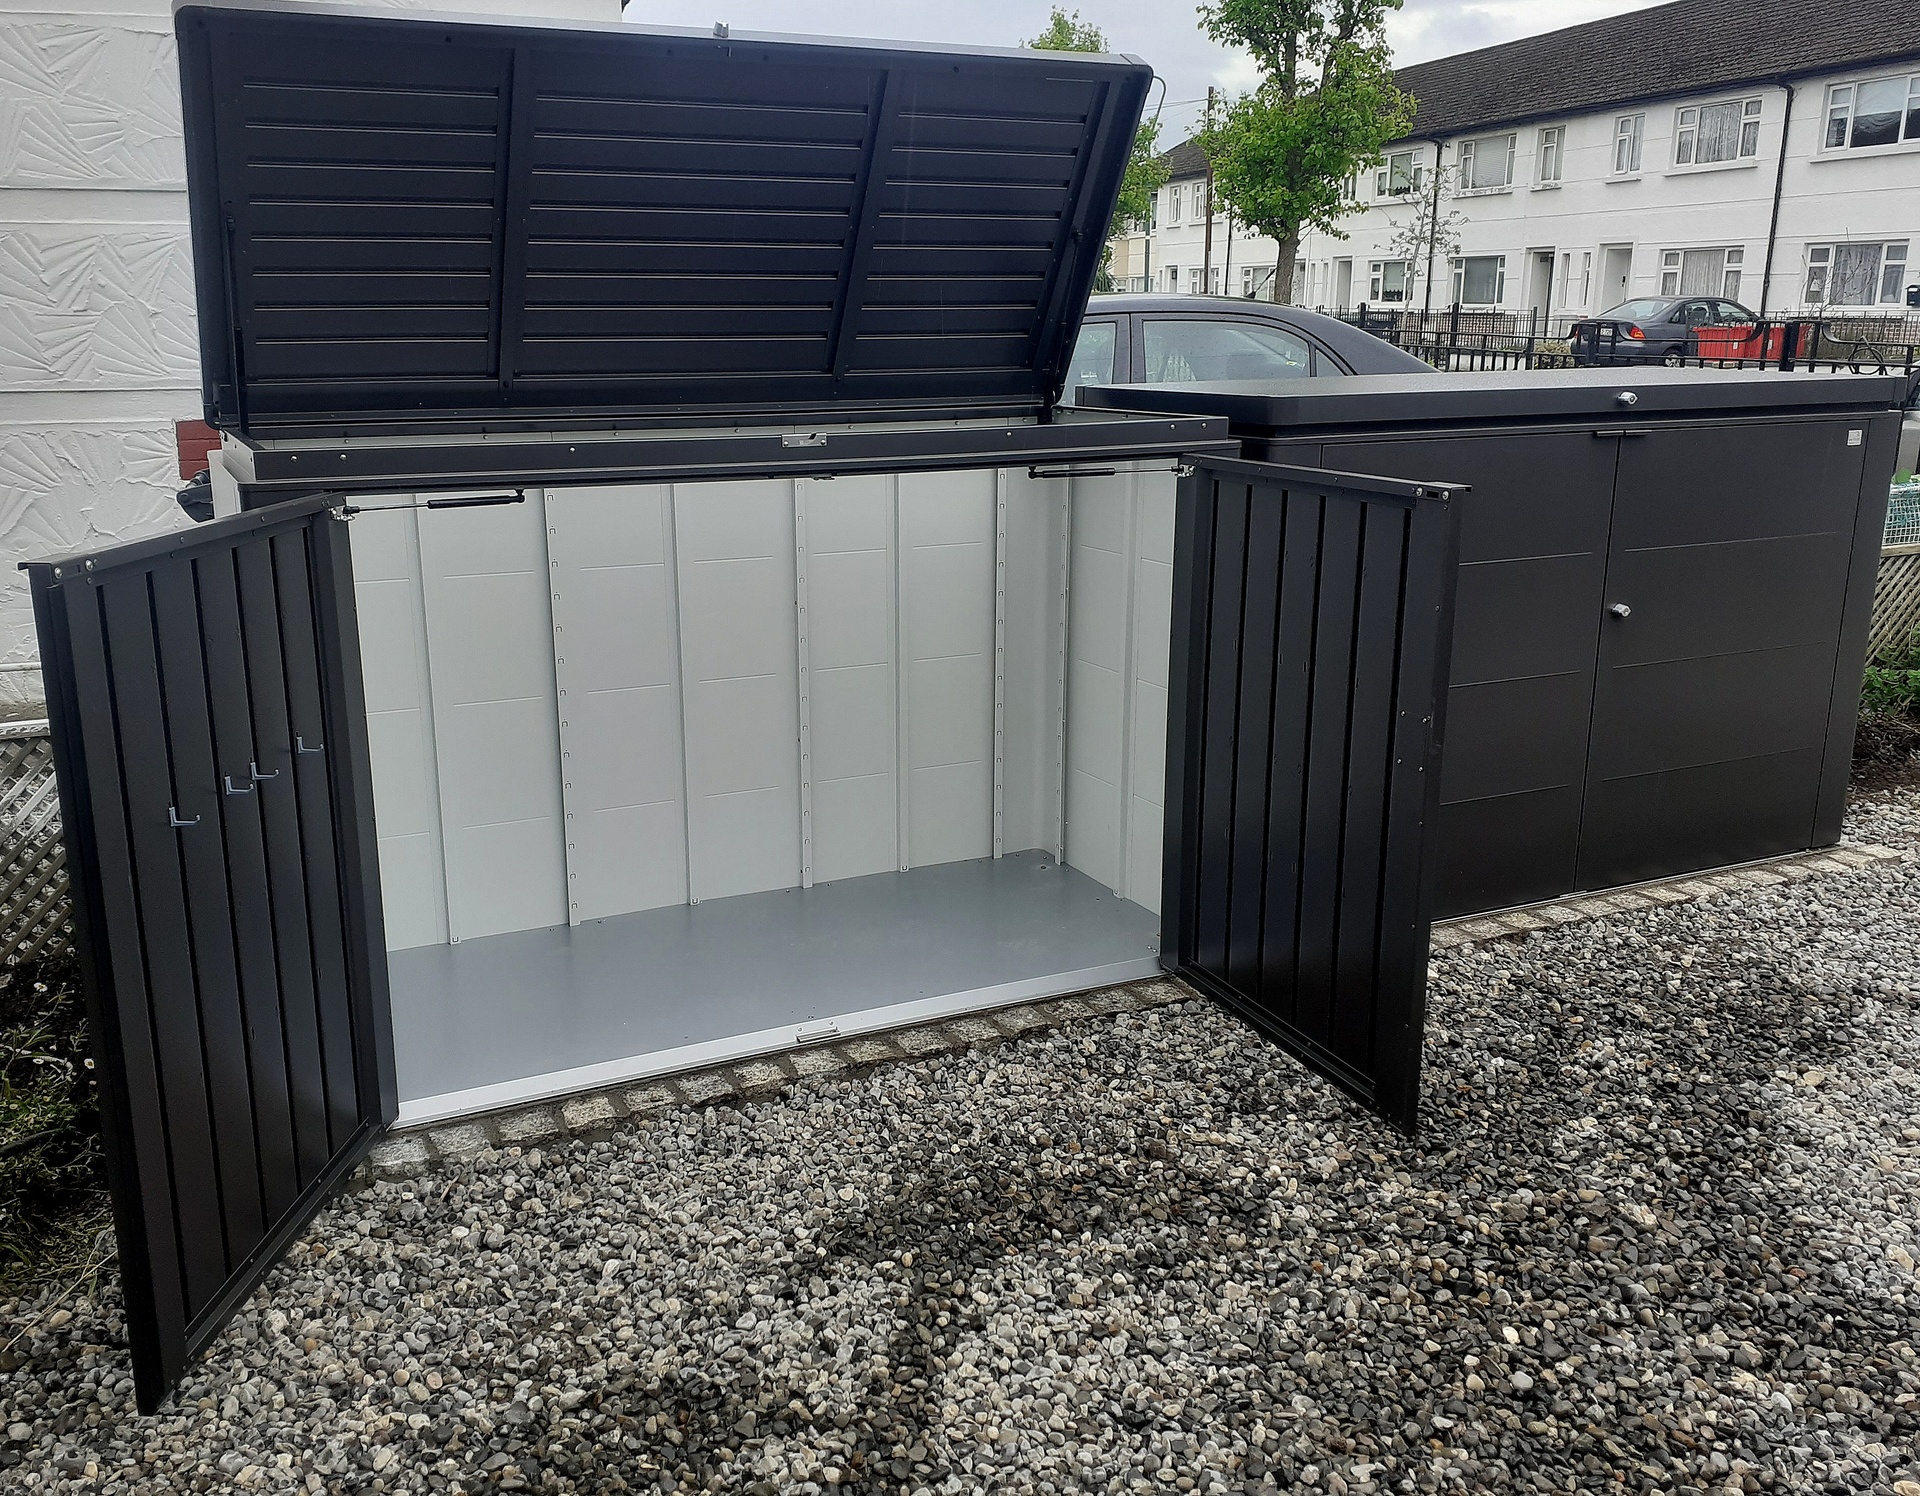 Biohort HighBoard 200 Storage Unit - a stylish & secure storage solution for Bins, Bikes etc  | Supplied + Fitted in Drumcondra, Dublin 9 by Owen Chubb Landscapers.